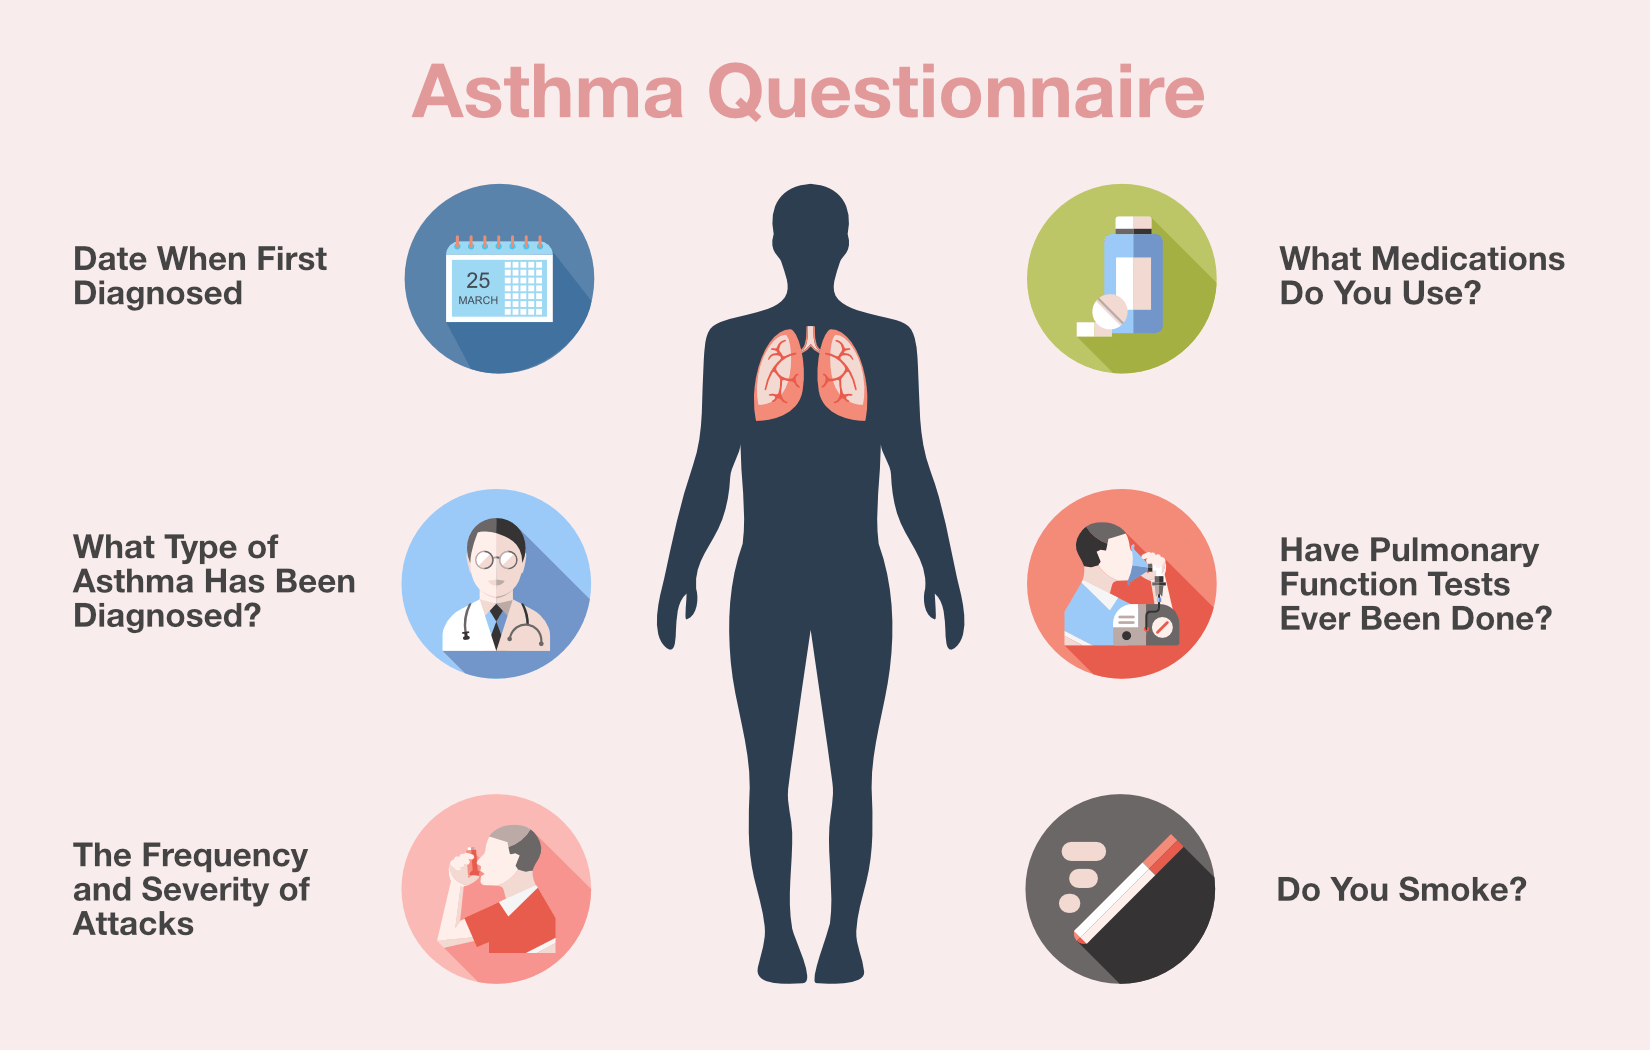 asthma questionnaire infographic